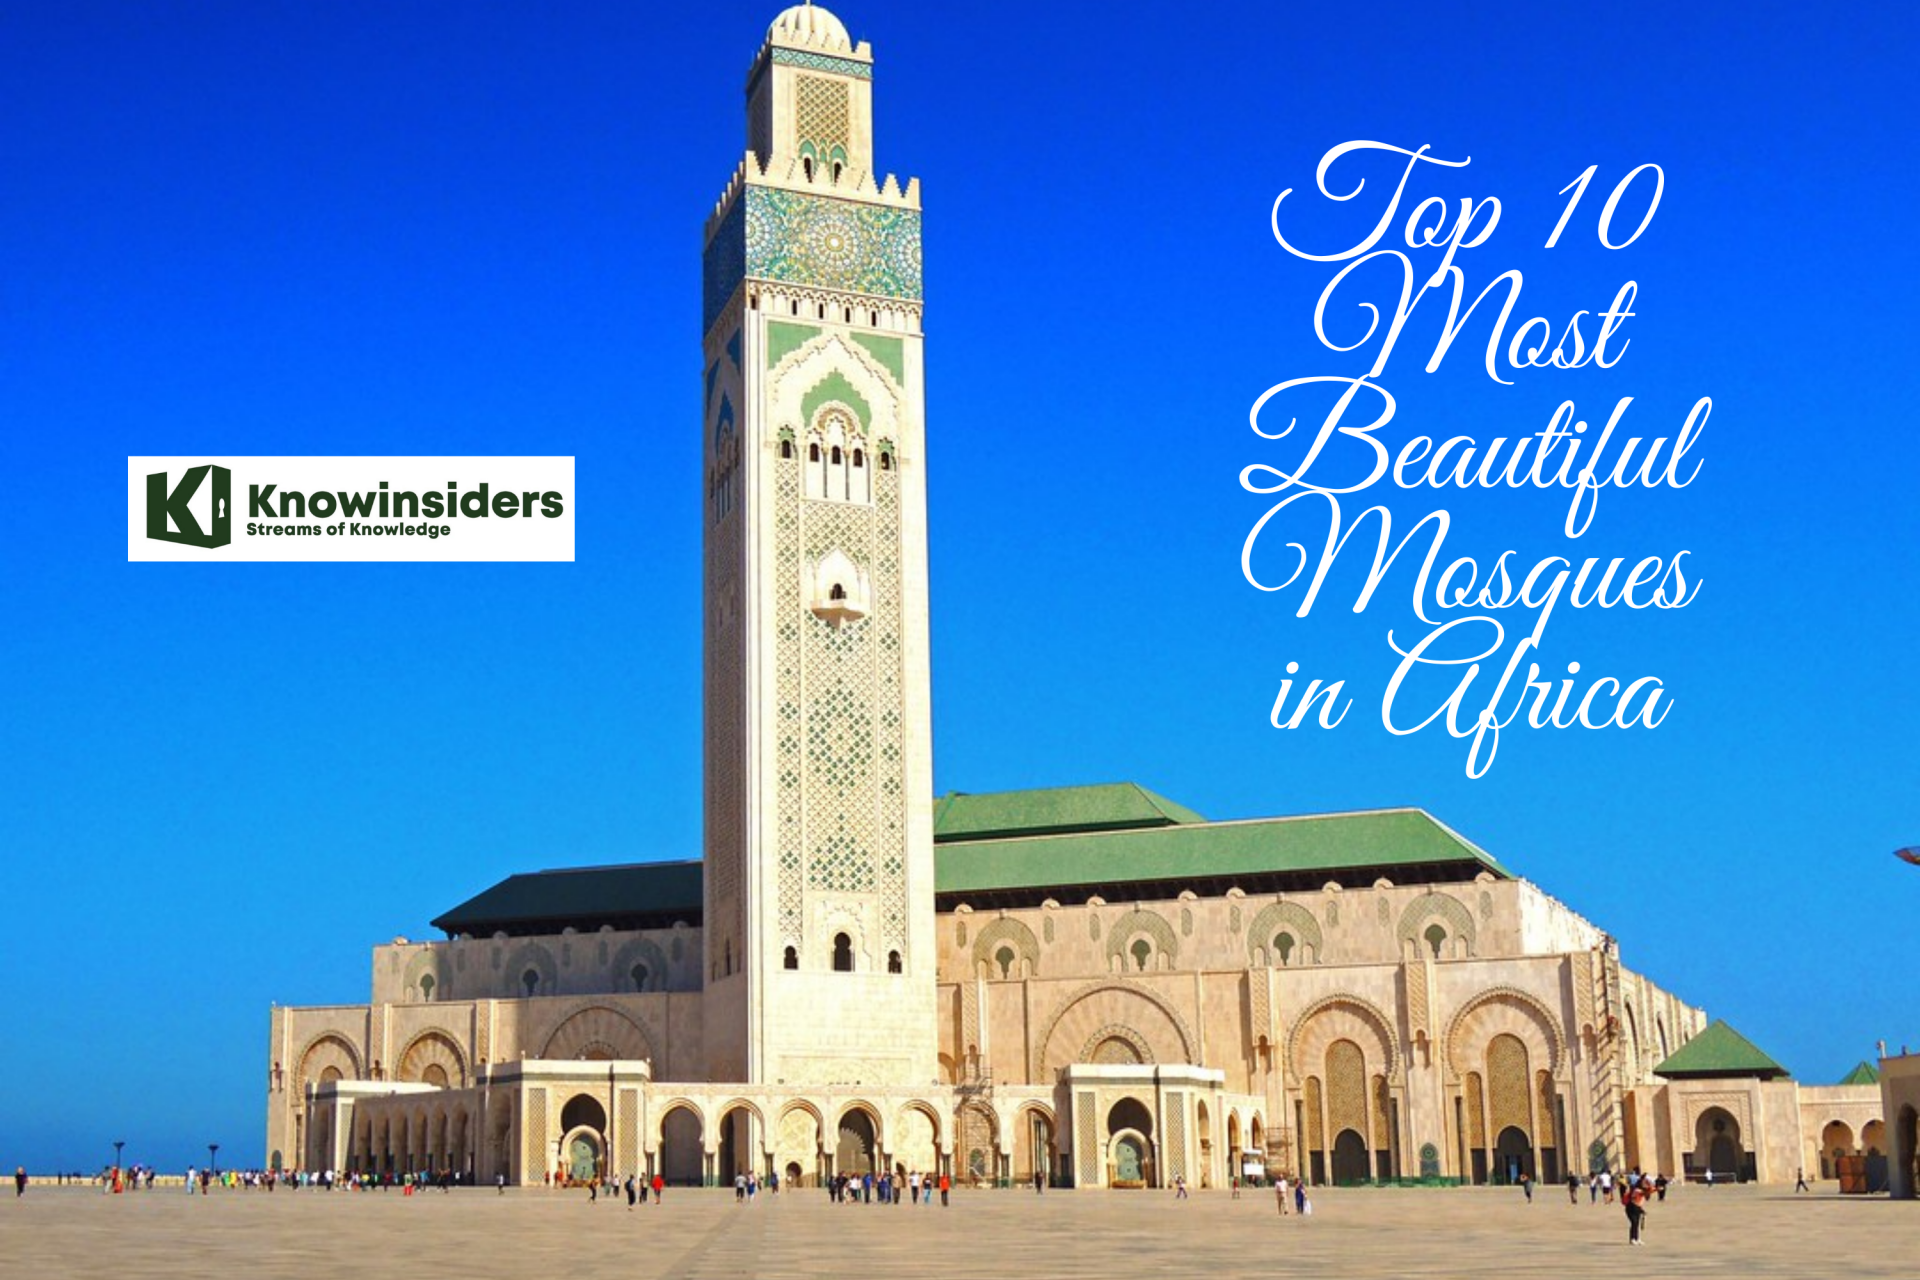 Top 10 Most Beautiful Mosques in Africa